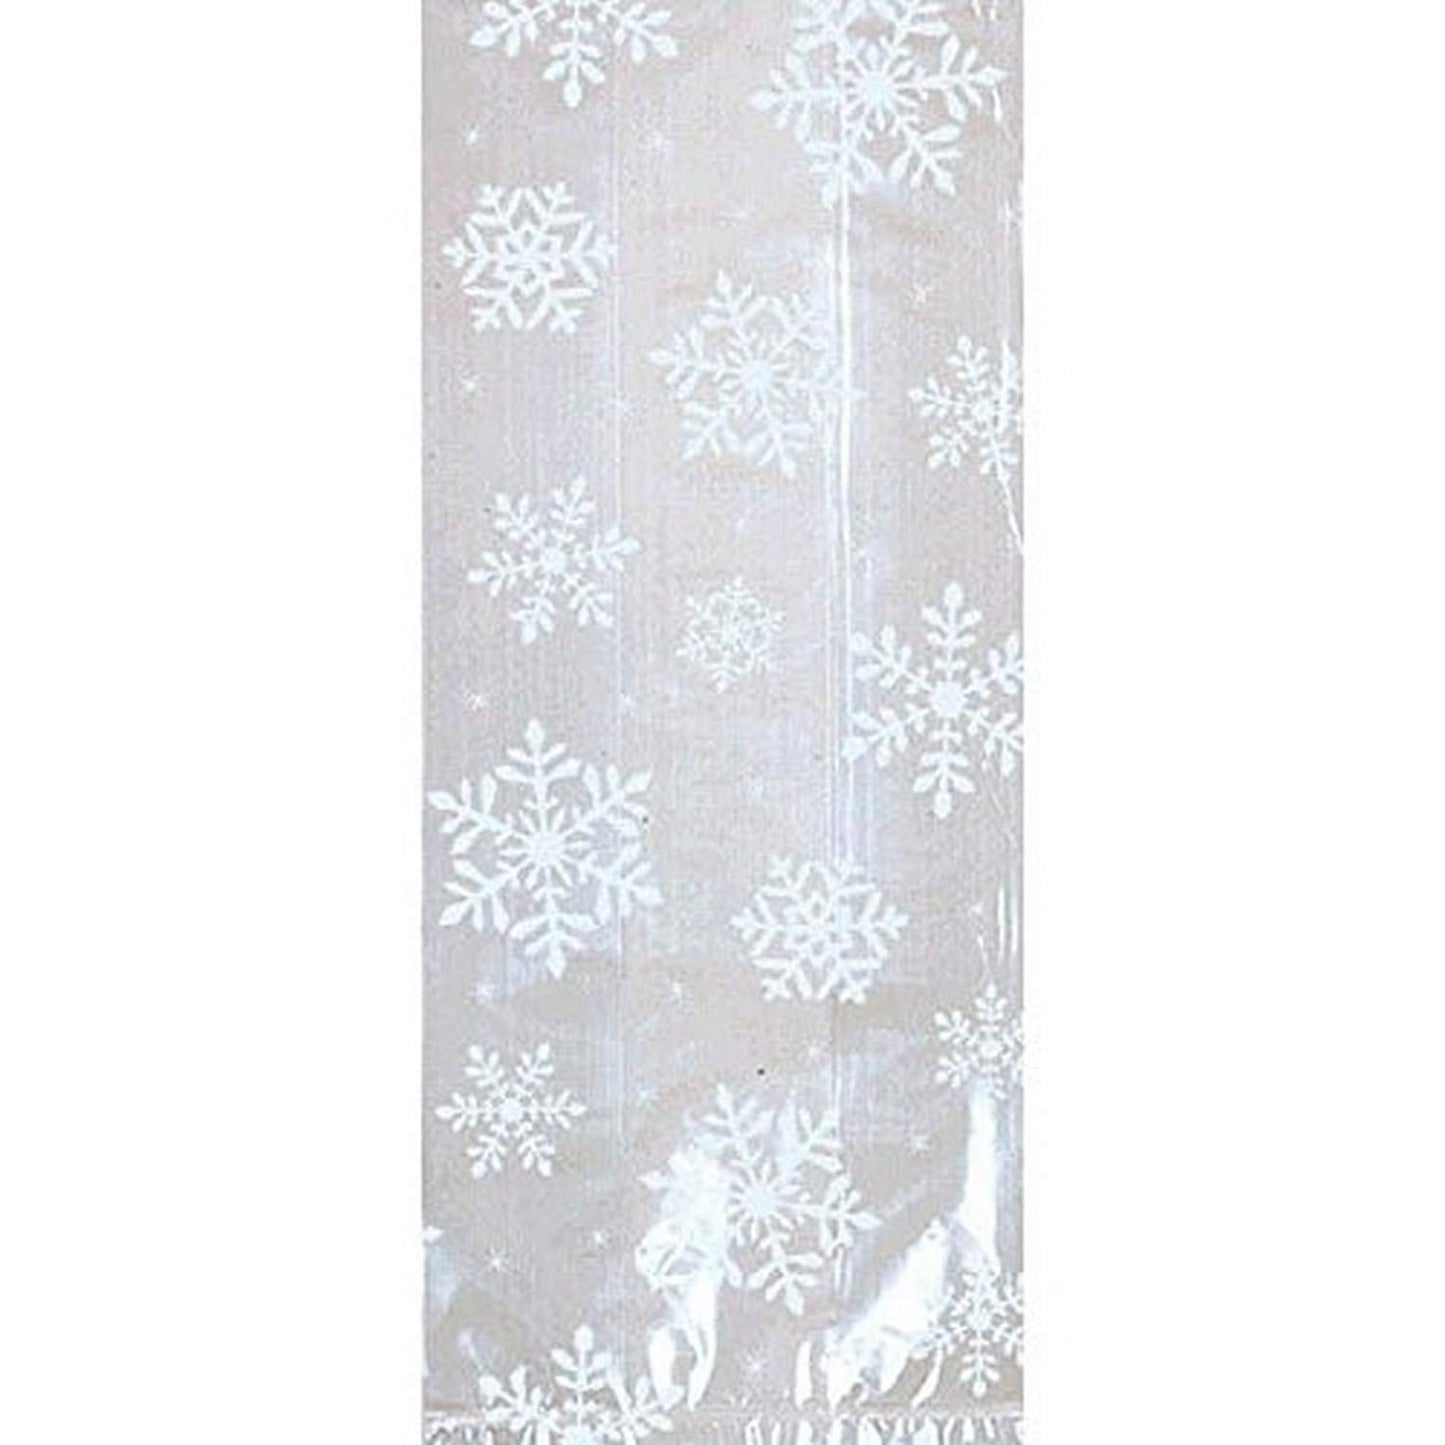 Snowflake Party Bags